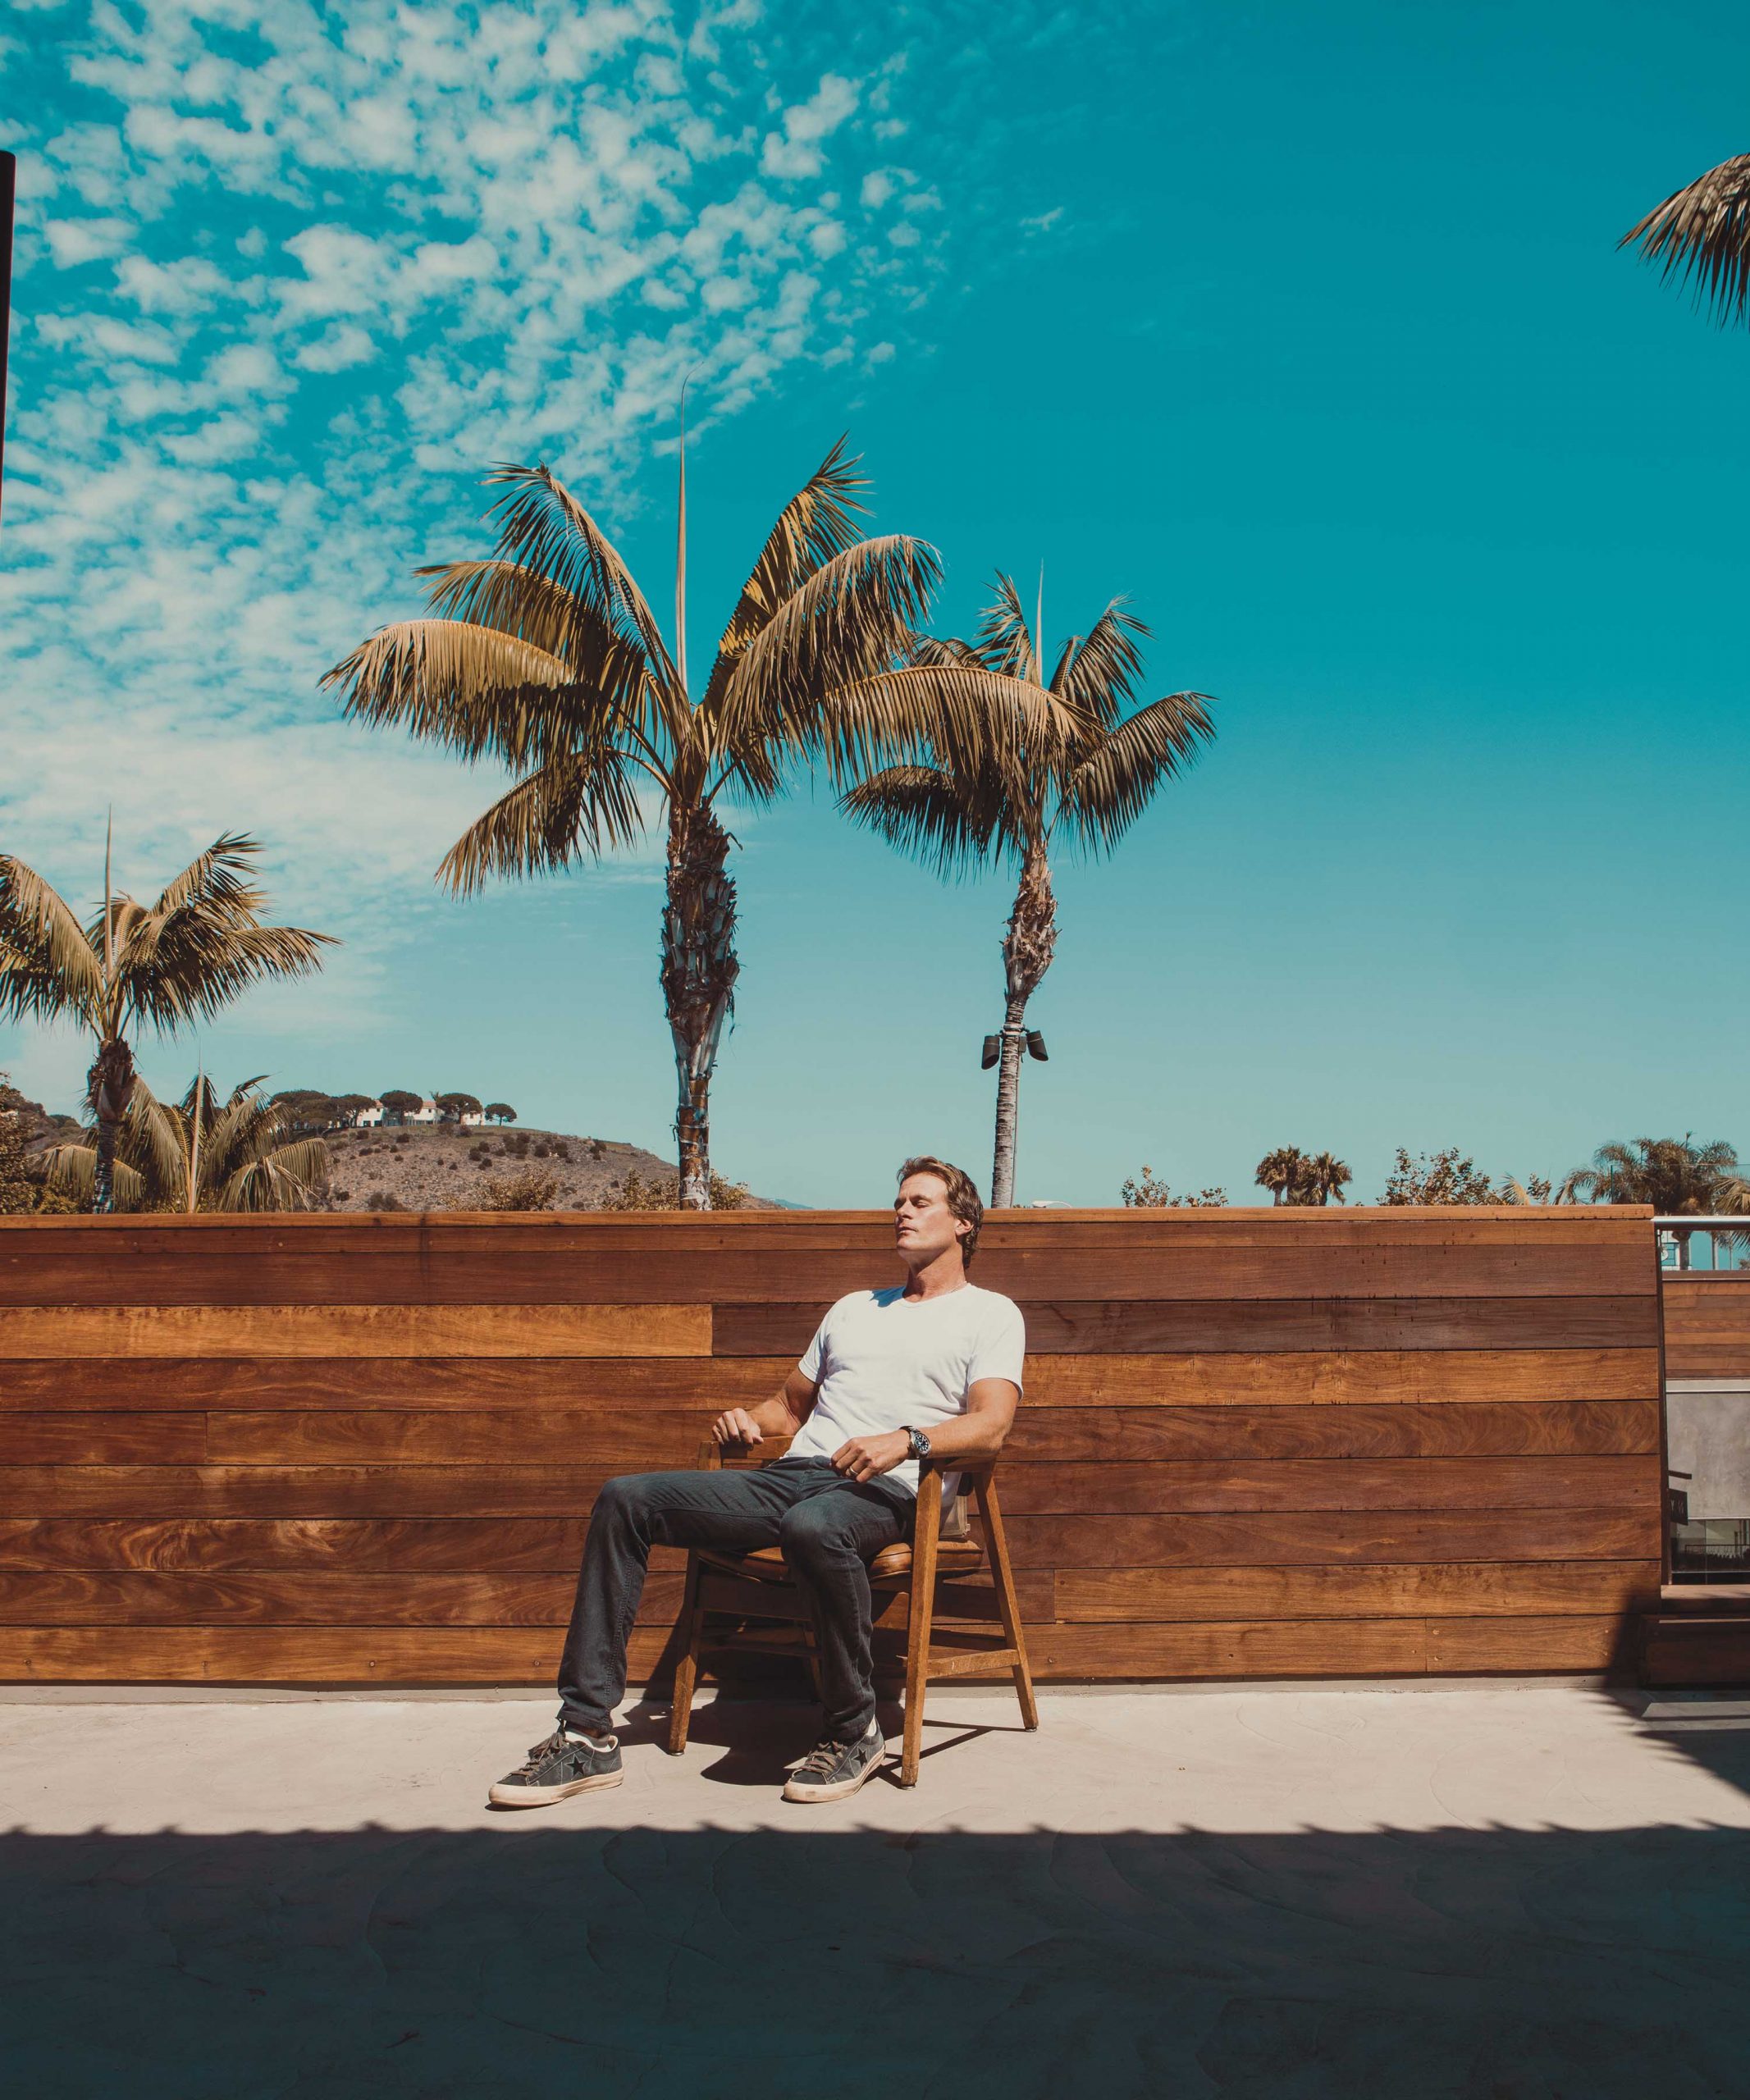 Entrepreneur & Visionary Extraordinaire Rande Gerber On The Evolution Of Casamigos, His Partnership With Omega, And More